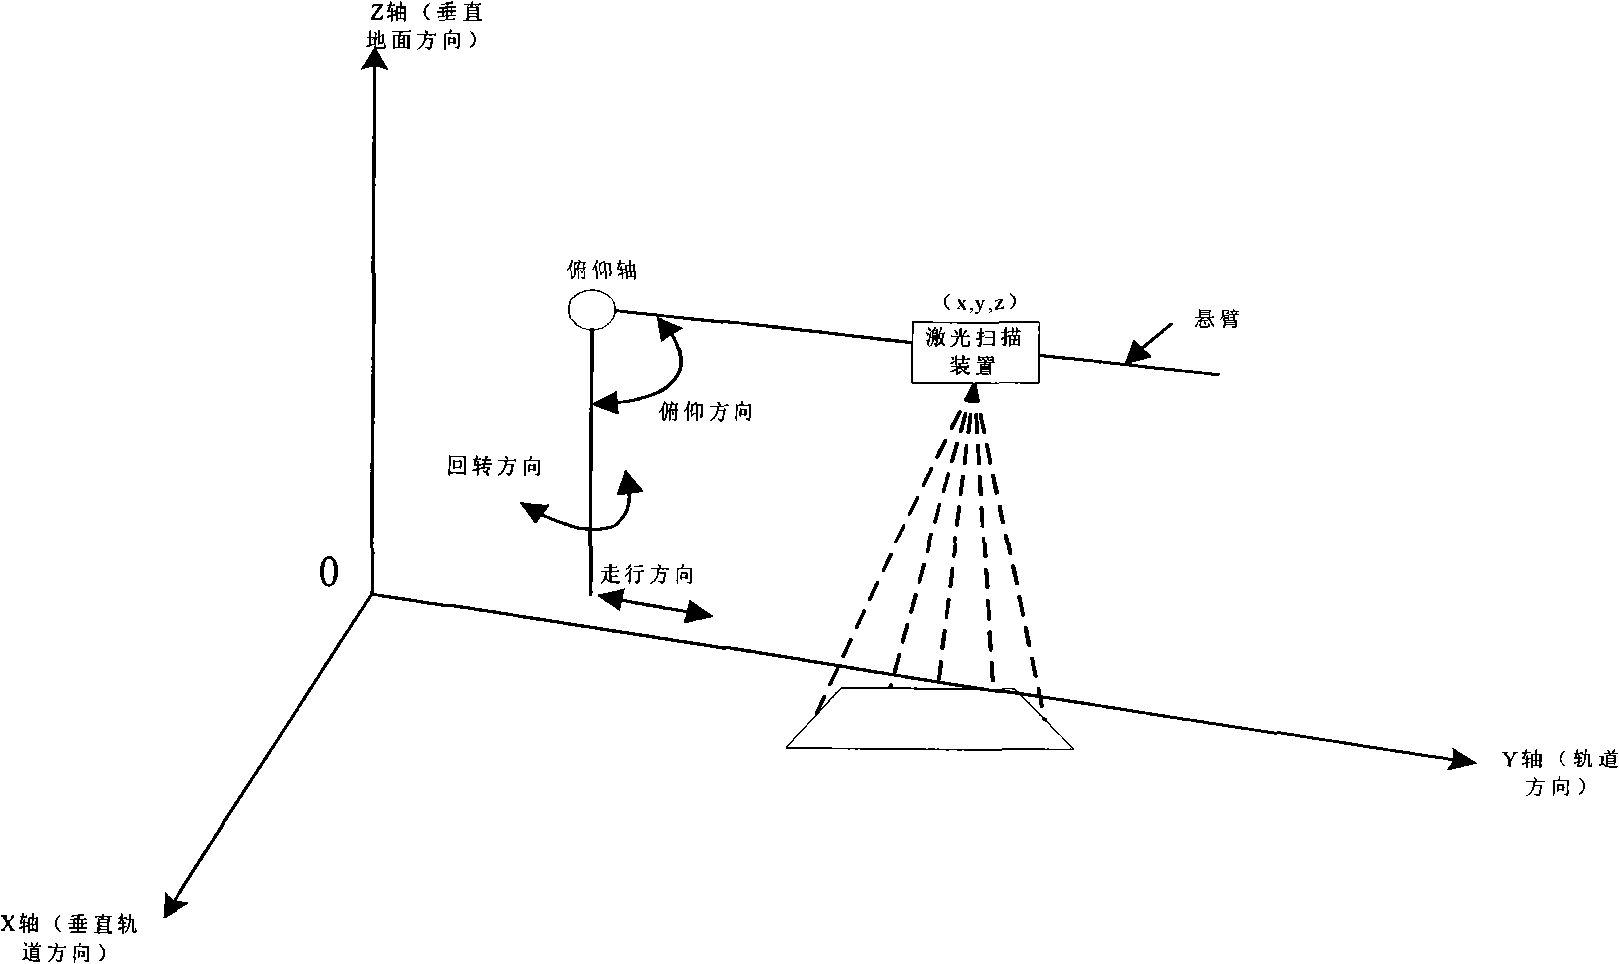 Three-dimensional imaging method for implementing material pile real time dynamic tracking